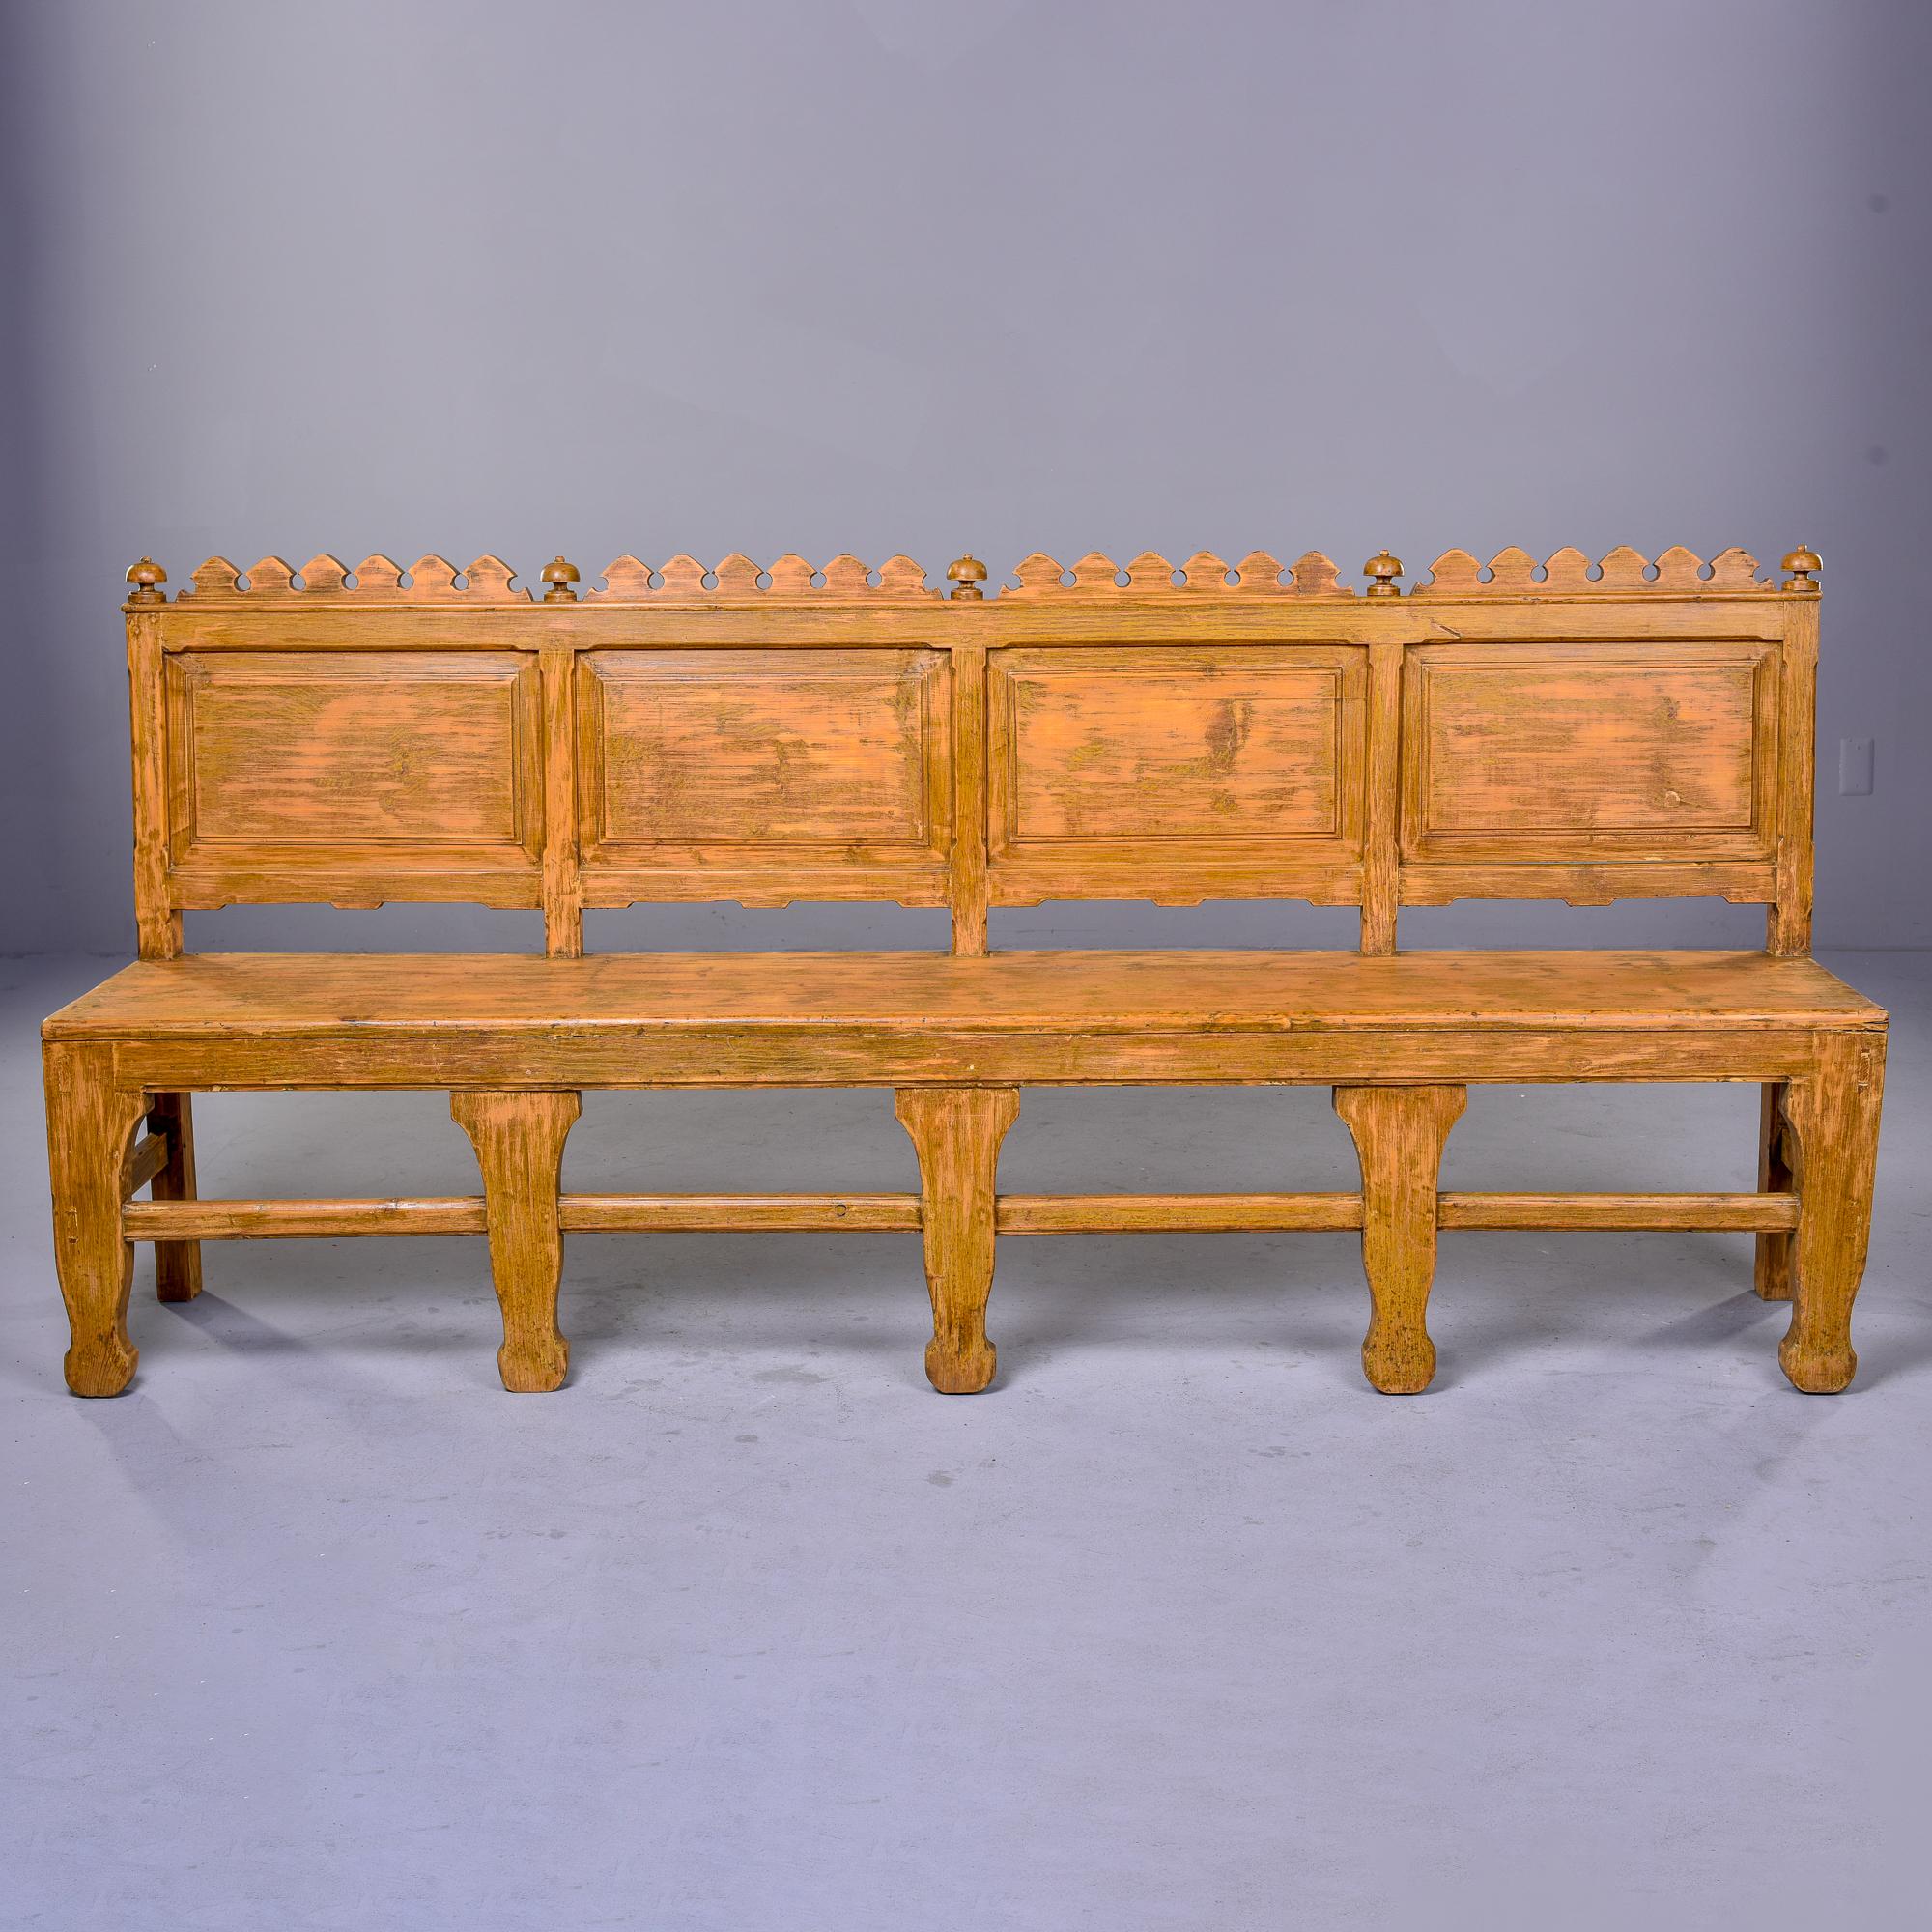 Found in England, this circa 1880s bench has seven legs, a front stretcher and four back rest panels with carved details at the top. May originally have been a church pew but we can’t be sure. Pale muted pumpkin color paint does not appear to be